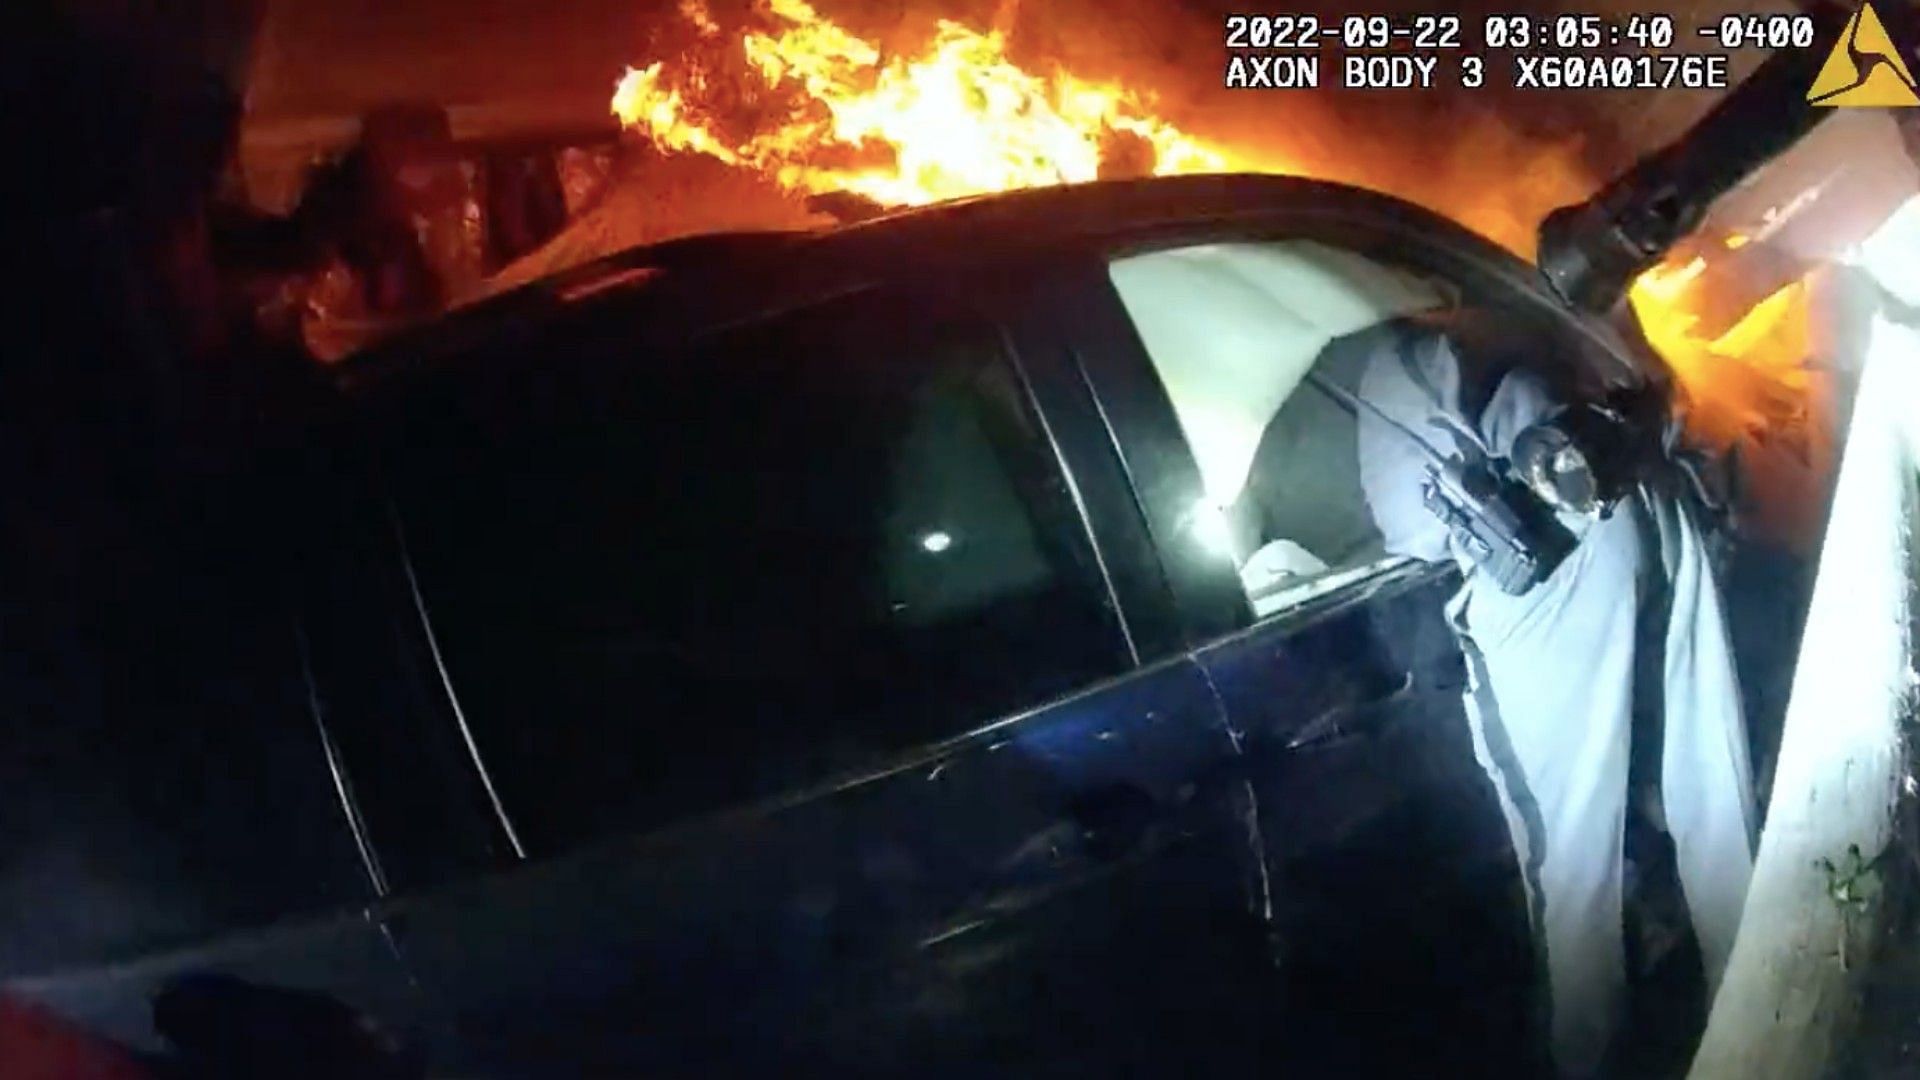 New York State Trooper rescuing a teen from fire (Image via New York State Police)